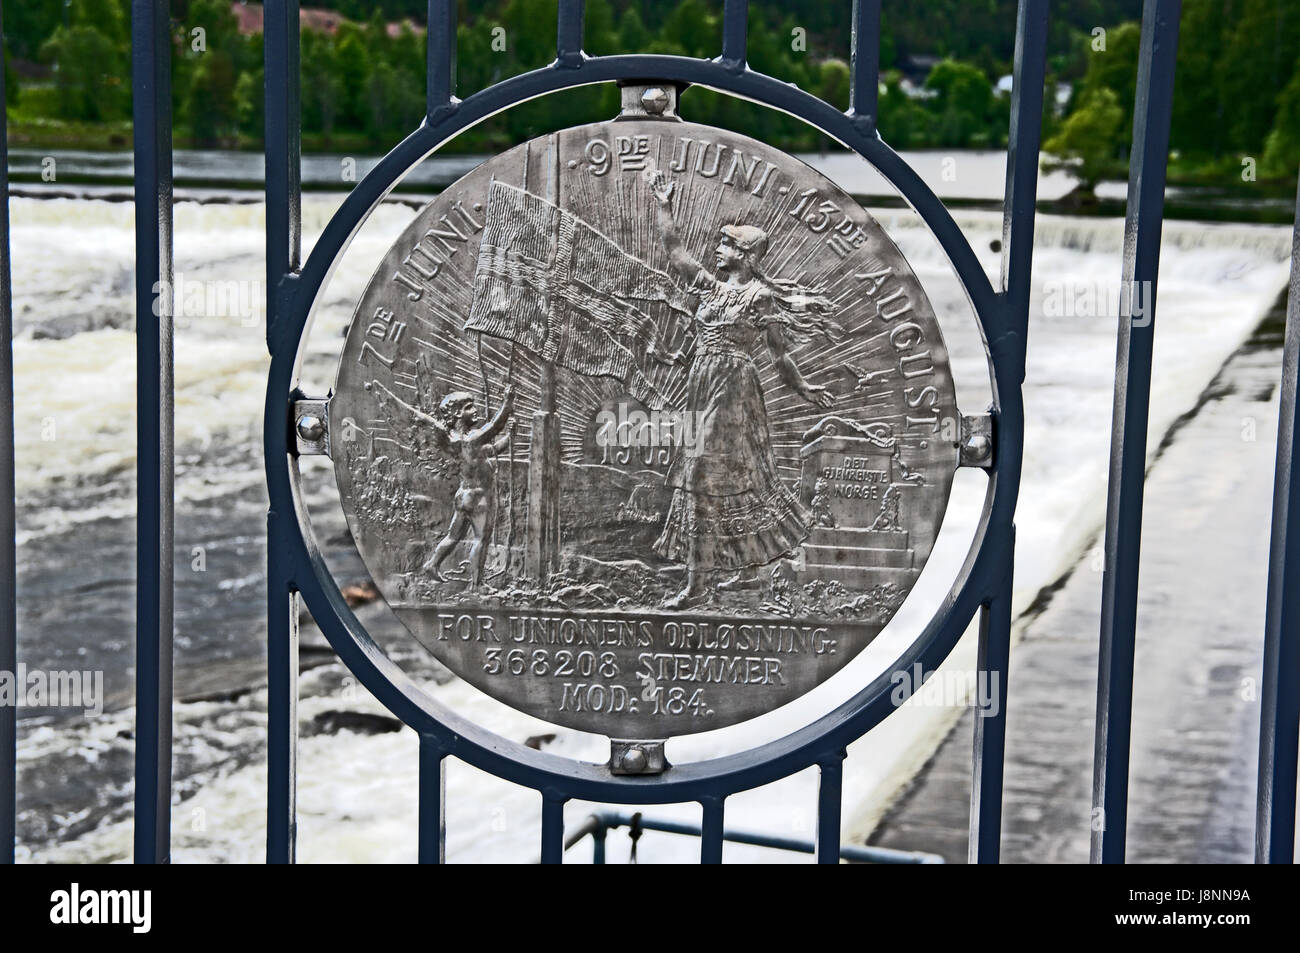 Replica Mint Coin, From Royal Mint Silver Mine, On Bridge over River, Kongsberg, Buskerud, Norway, Stock Photo